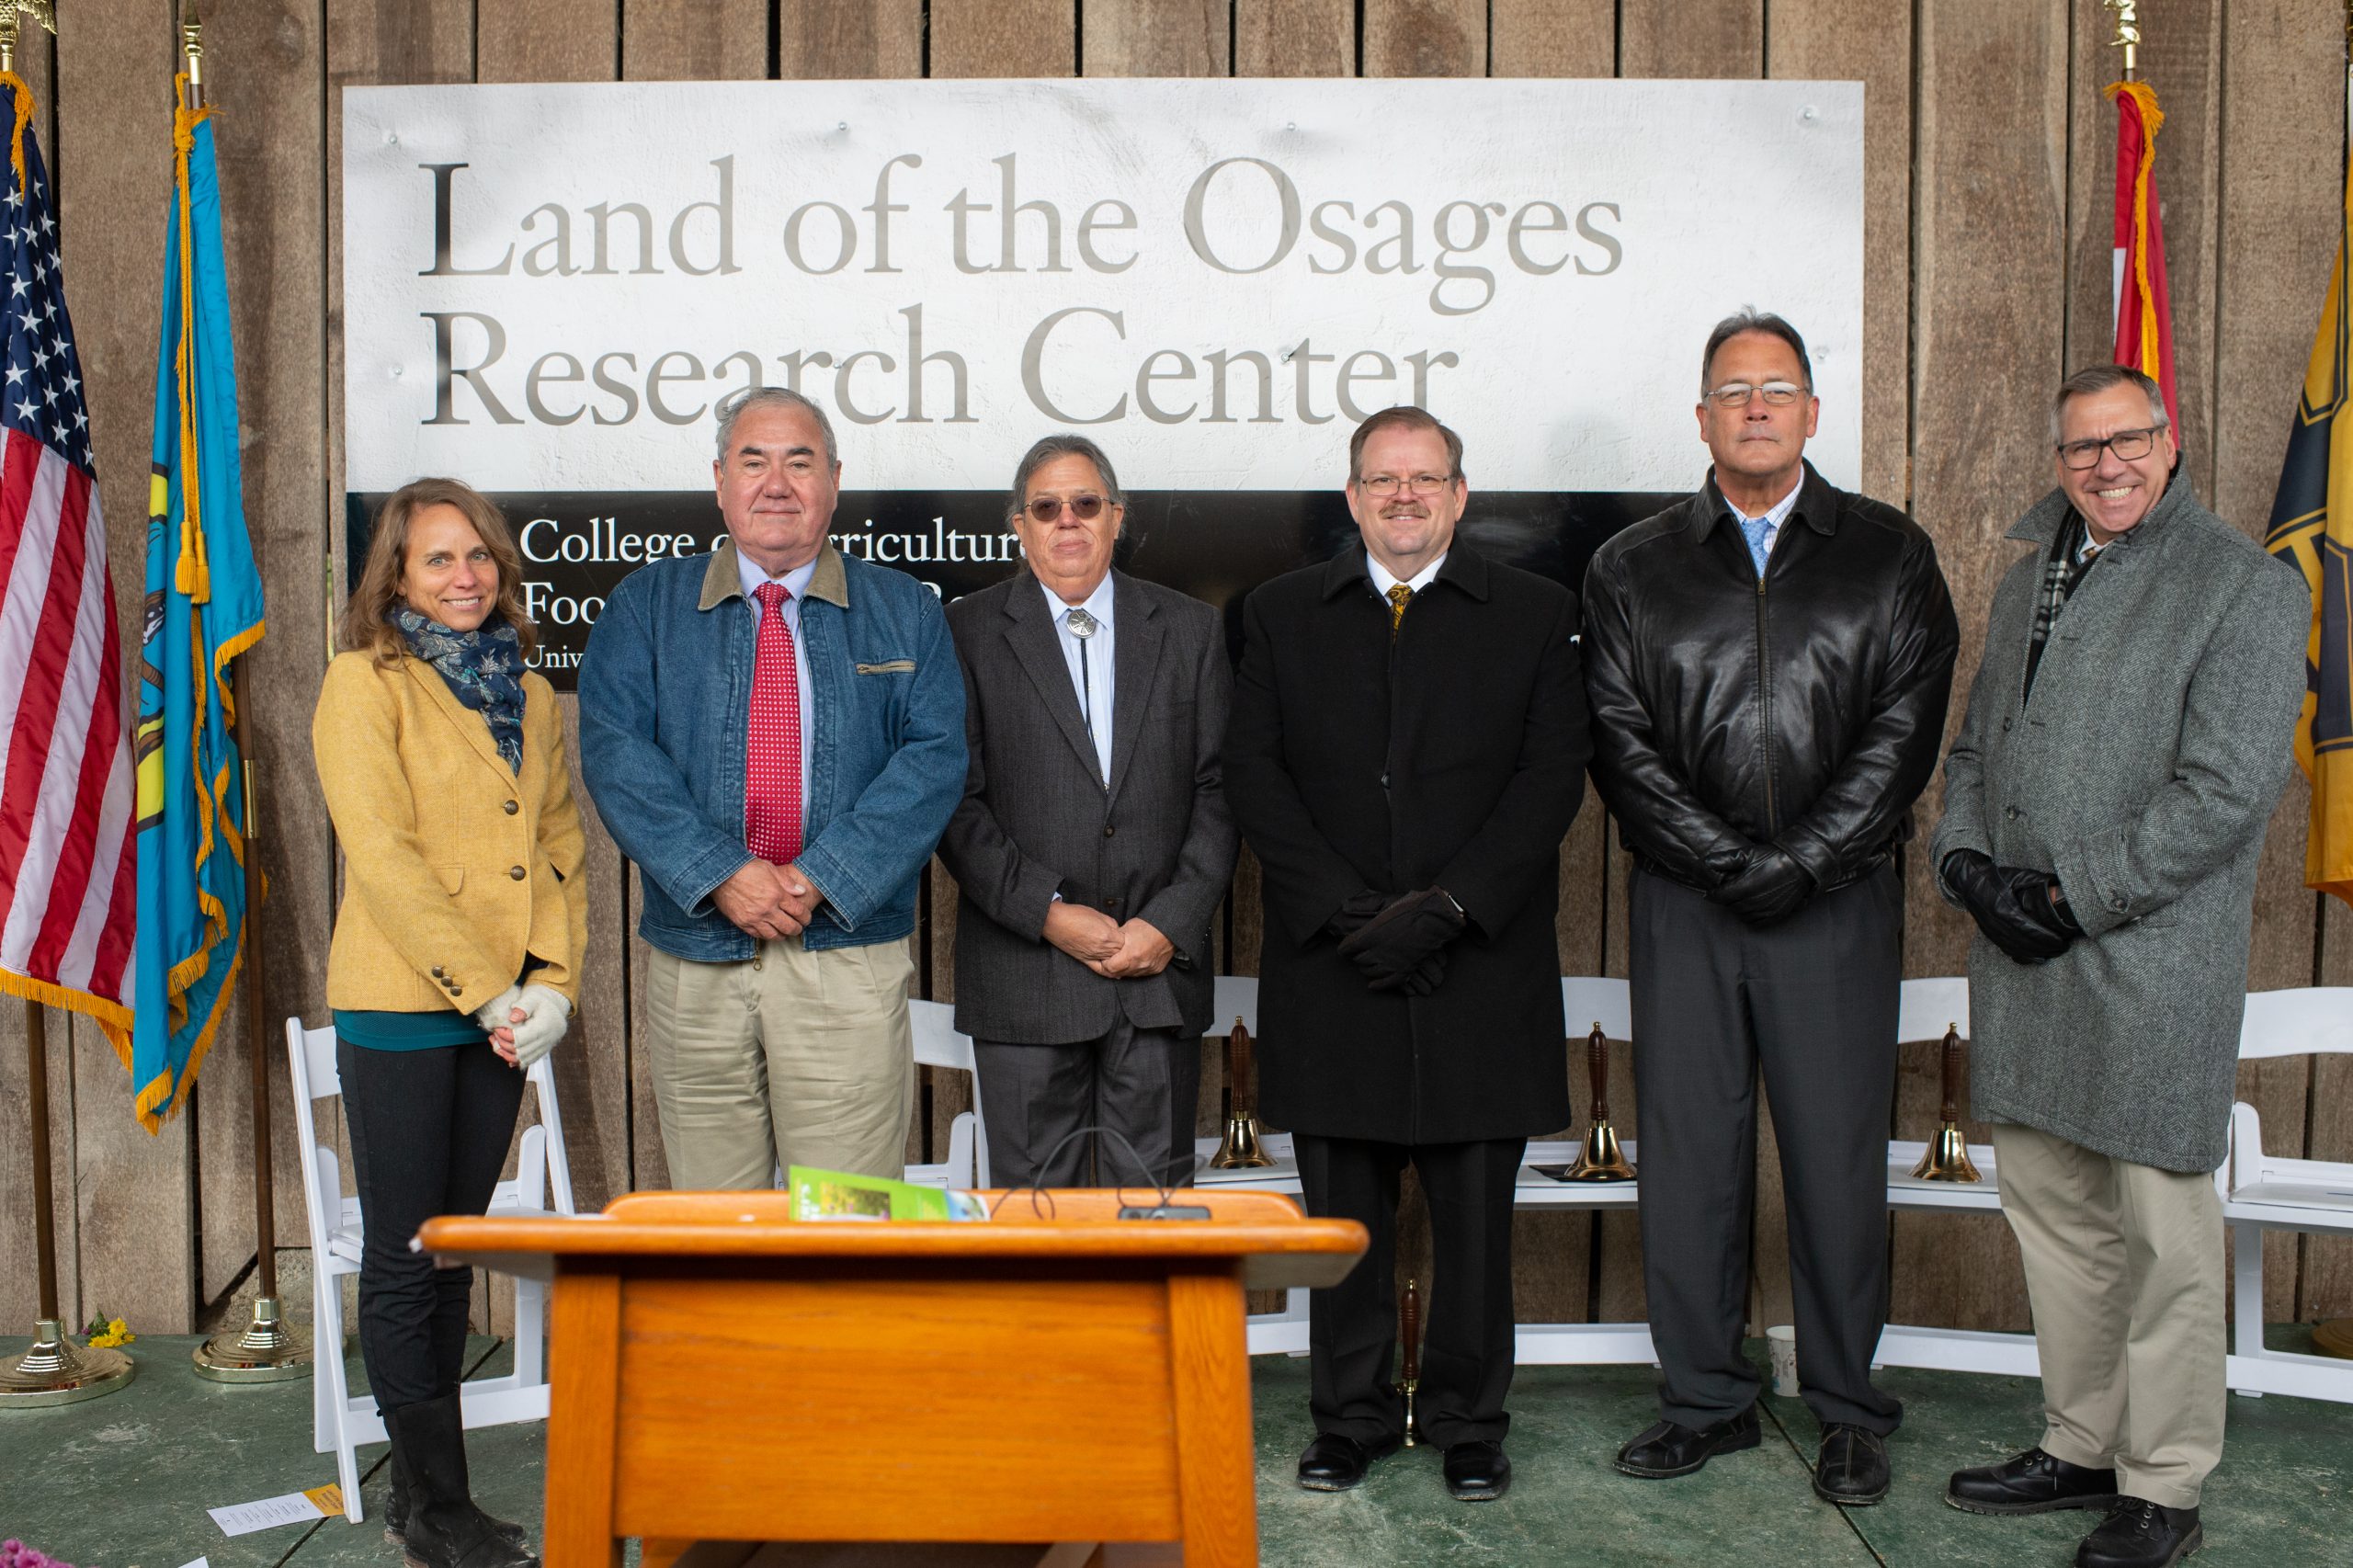 Land of the Osages Research Center (click to read)